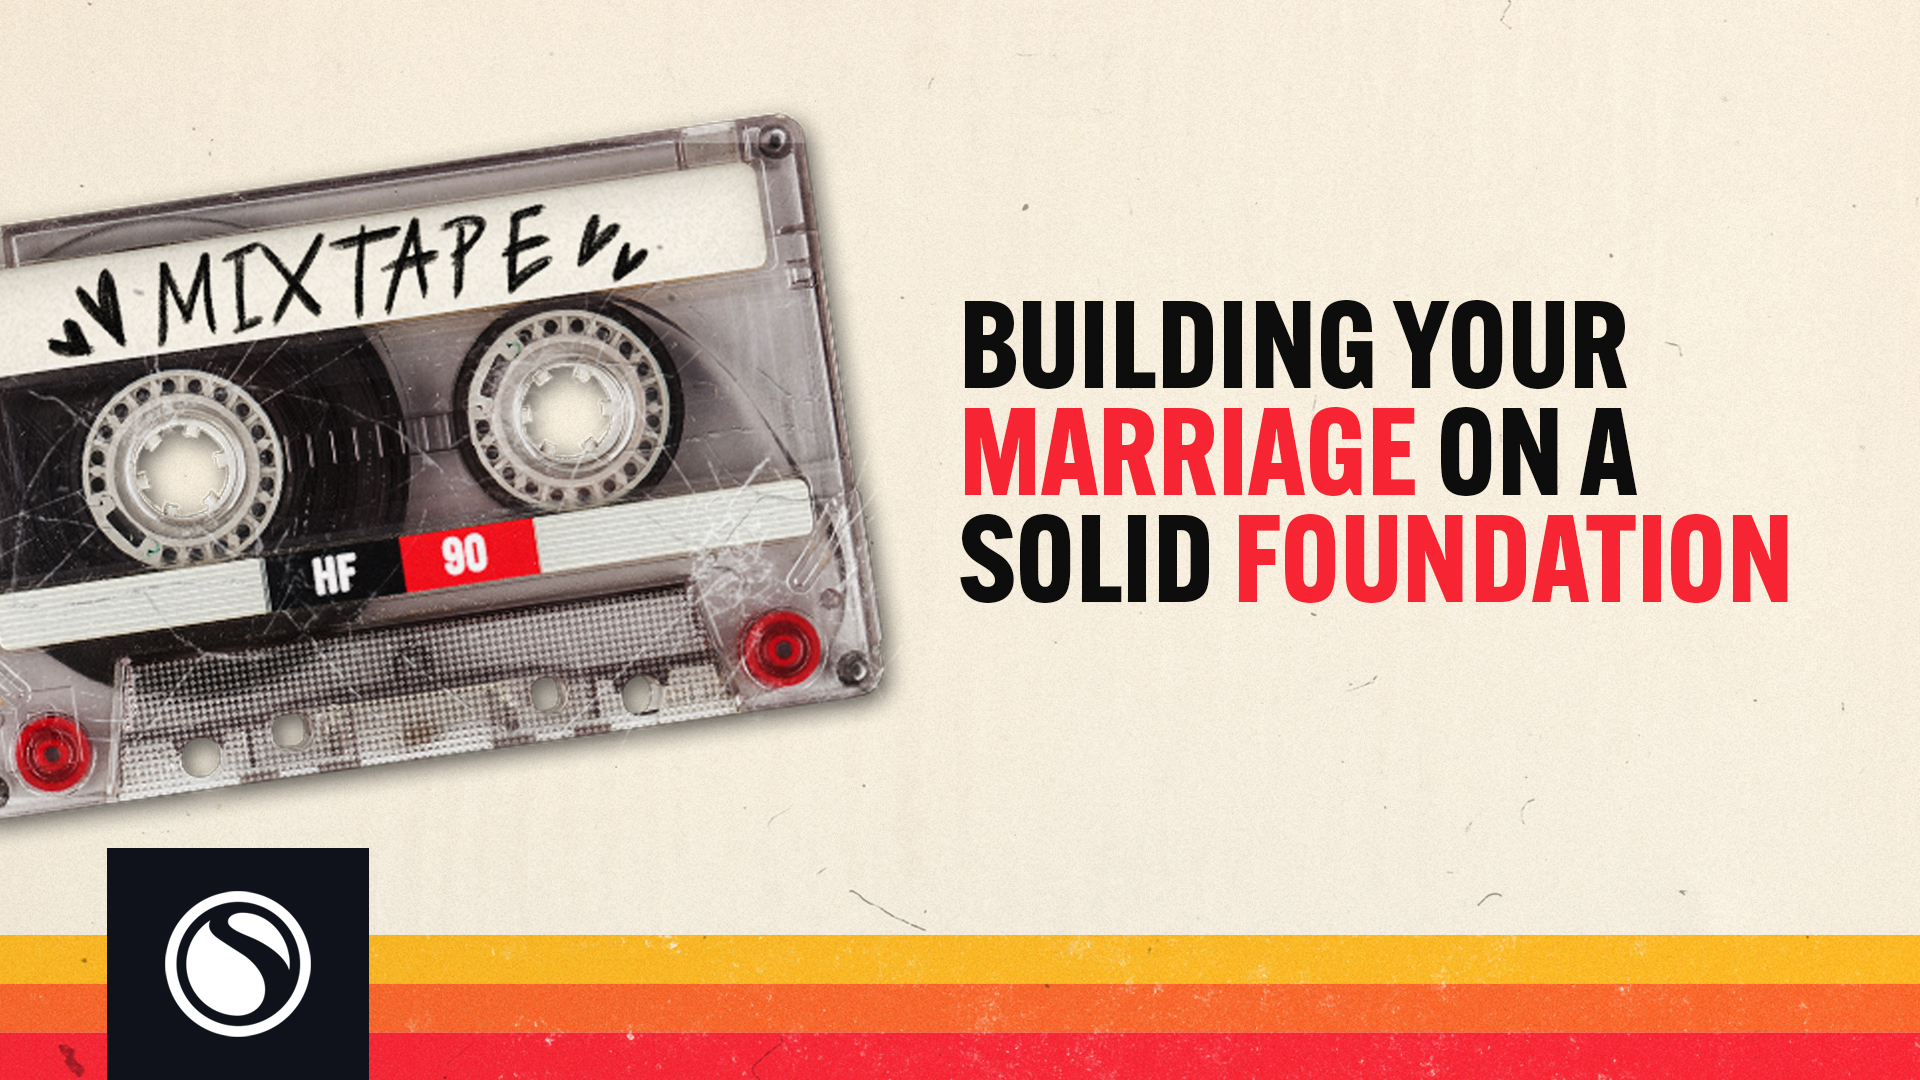 Watch Mixtape - Building Your Marriage On A Solid Foundation